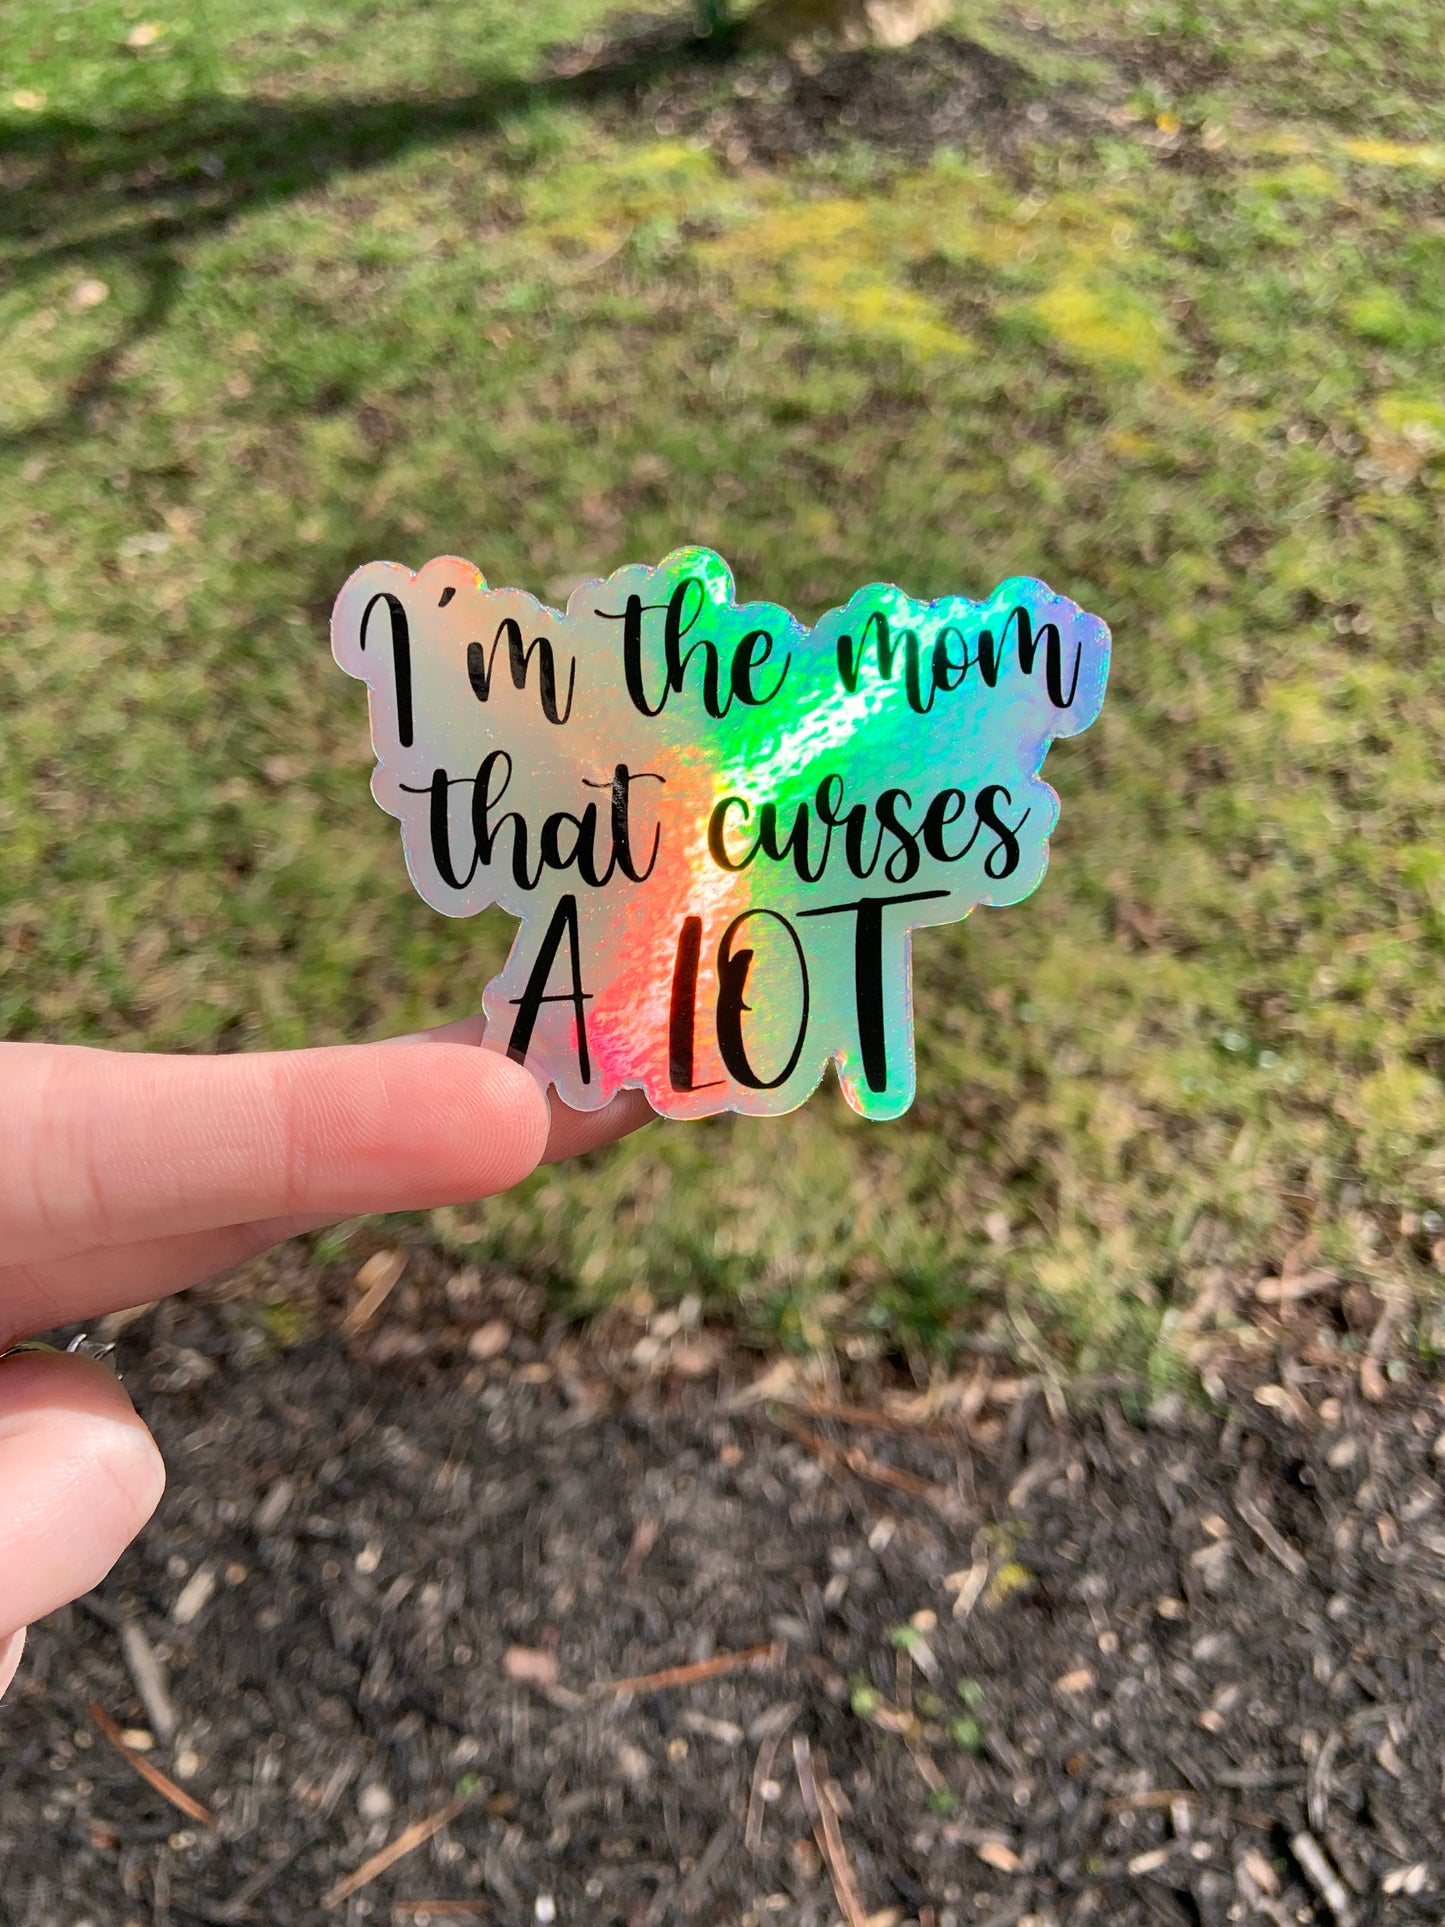 Holographic “I’m the Mom that curses A LOT” Vinyl Sticker